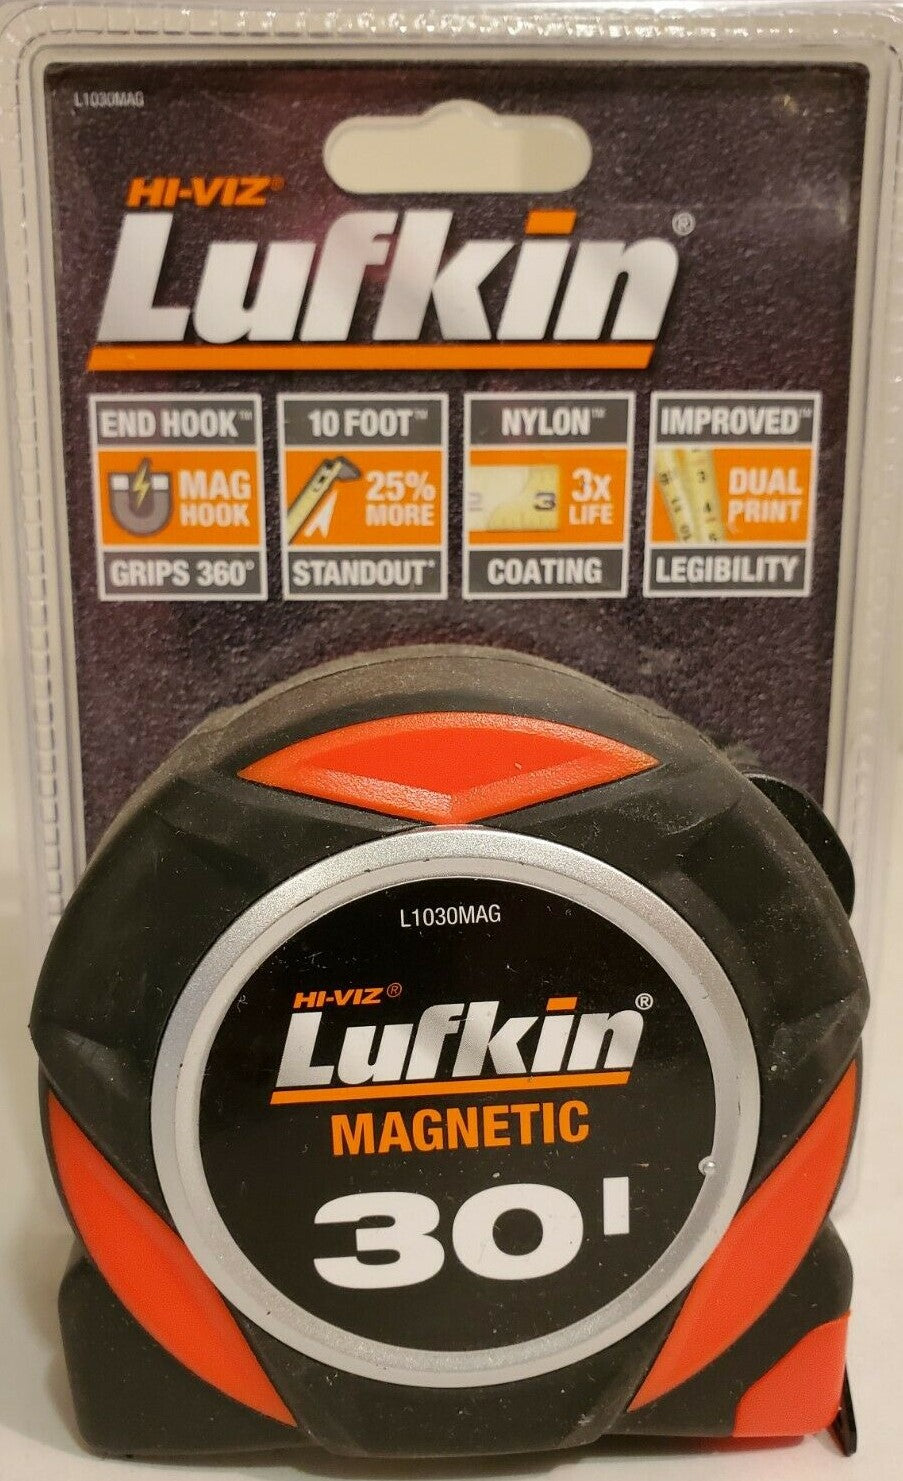 Lufkin L1030MAG 30' x 1-3/16" Magnetic Tape Measure Command Series